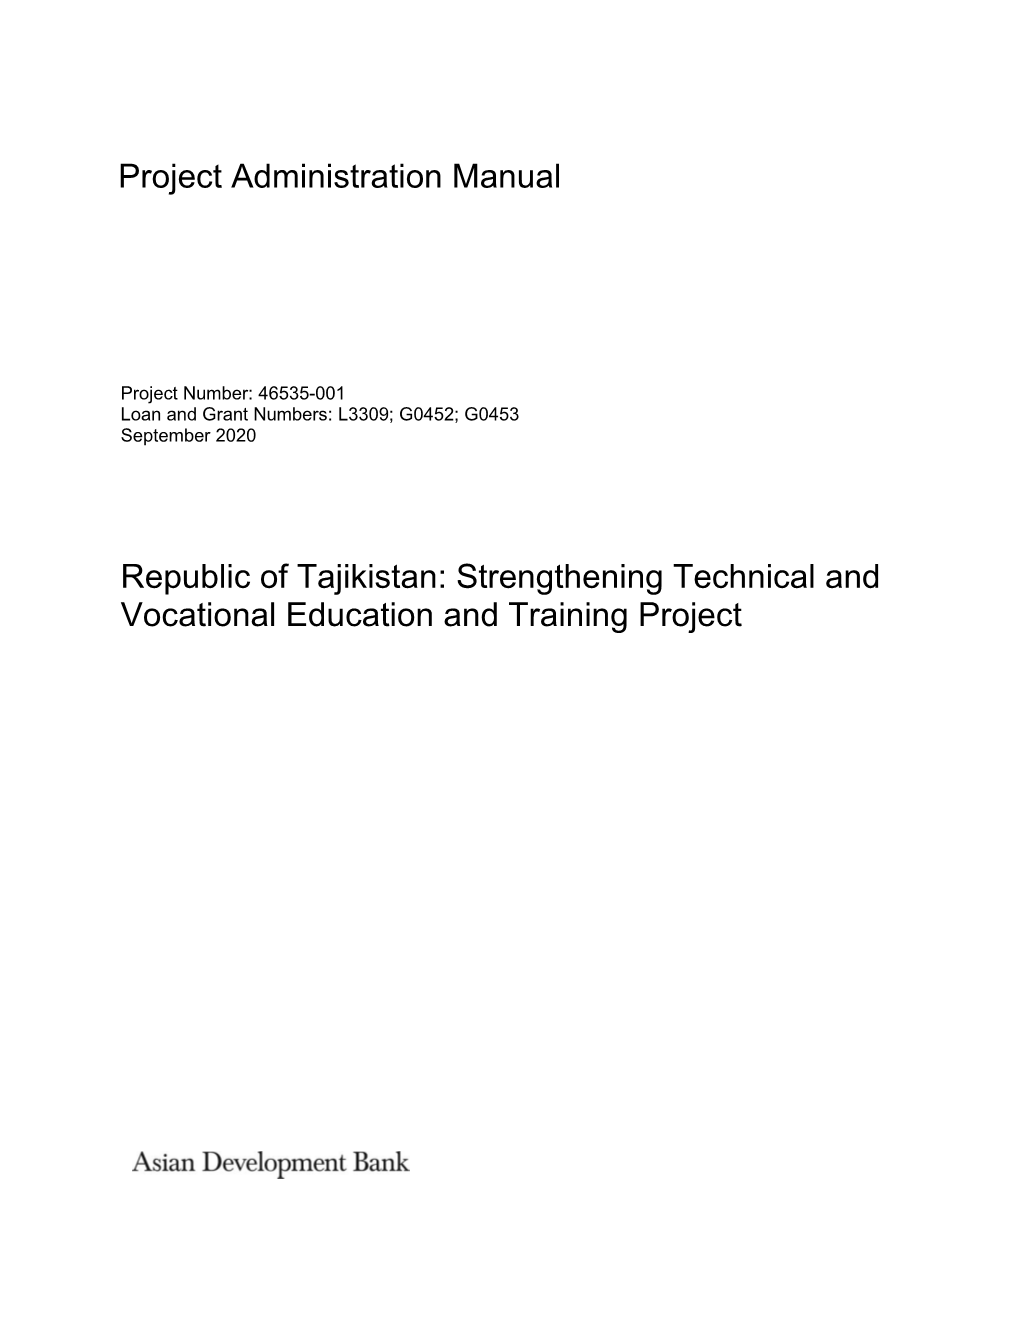 Republic of Tajikistan: Strengthening Technical and Vocational Education and Training Project